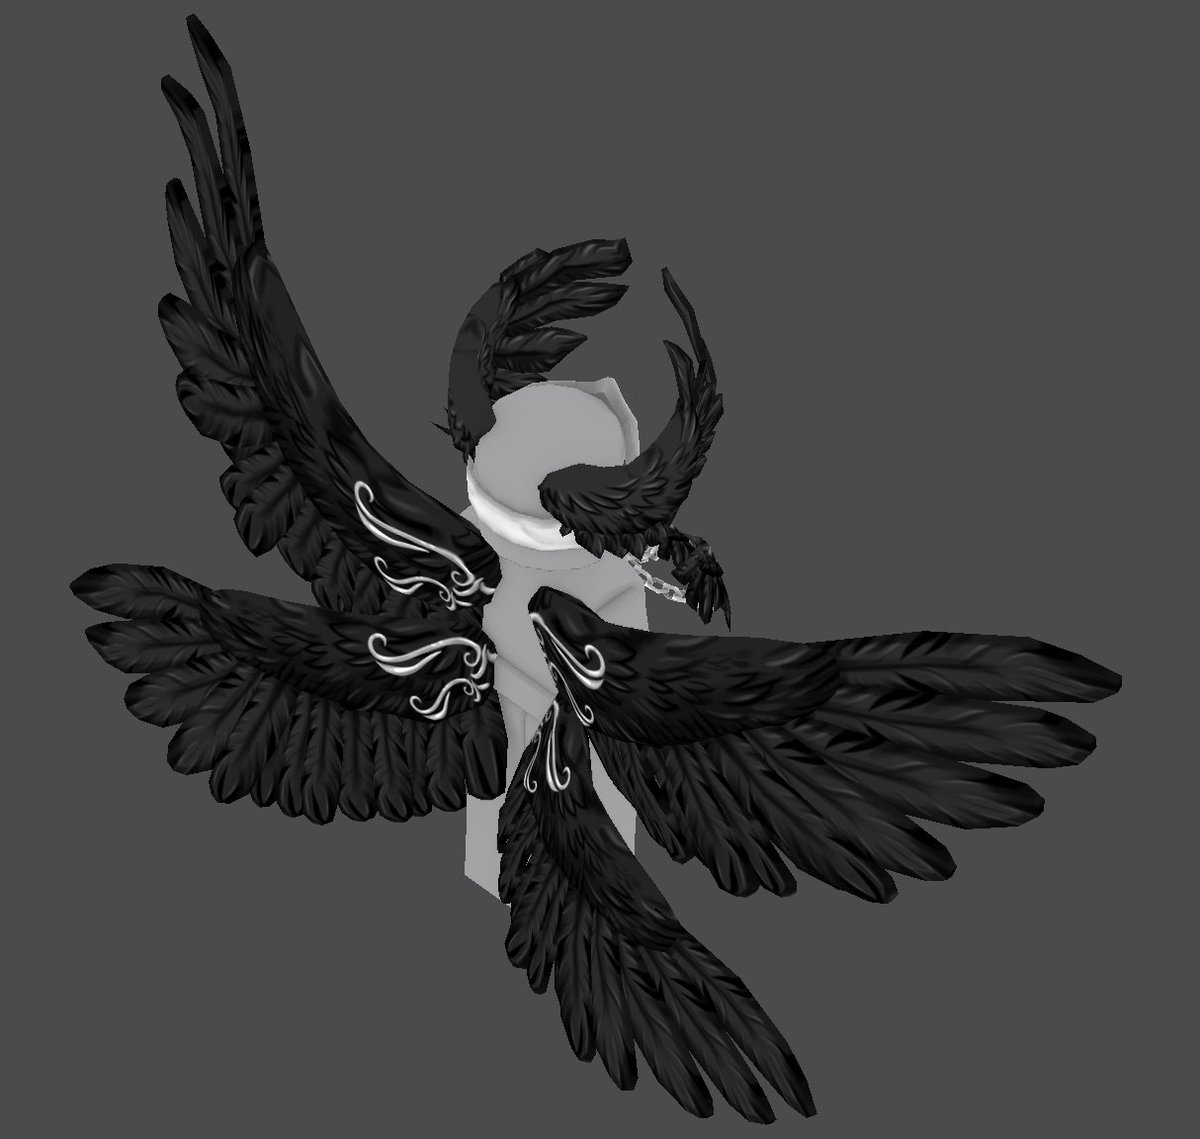 Erythia On Twitter Are You A Dark Angle Or A Light Angle Haha Just Got Done Texturing The Demon Version Of My Guardian Wings Texturing In Black Is Such A Challenge Now - white wings roblox